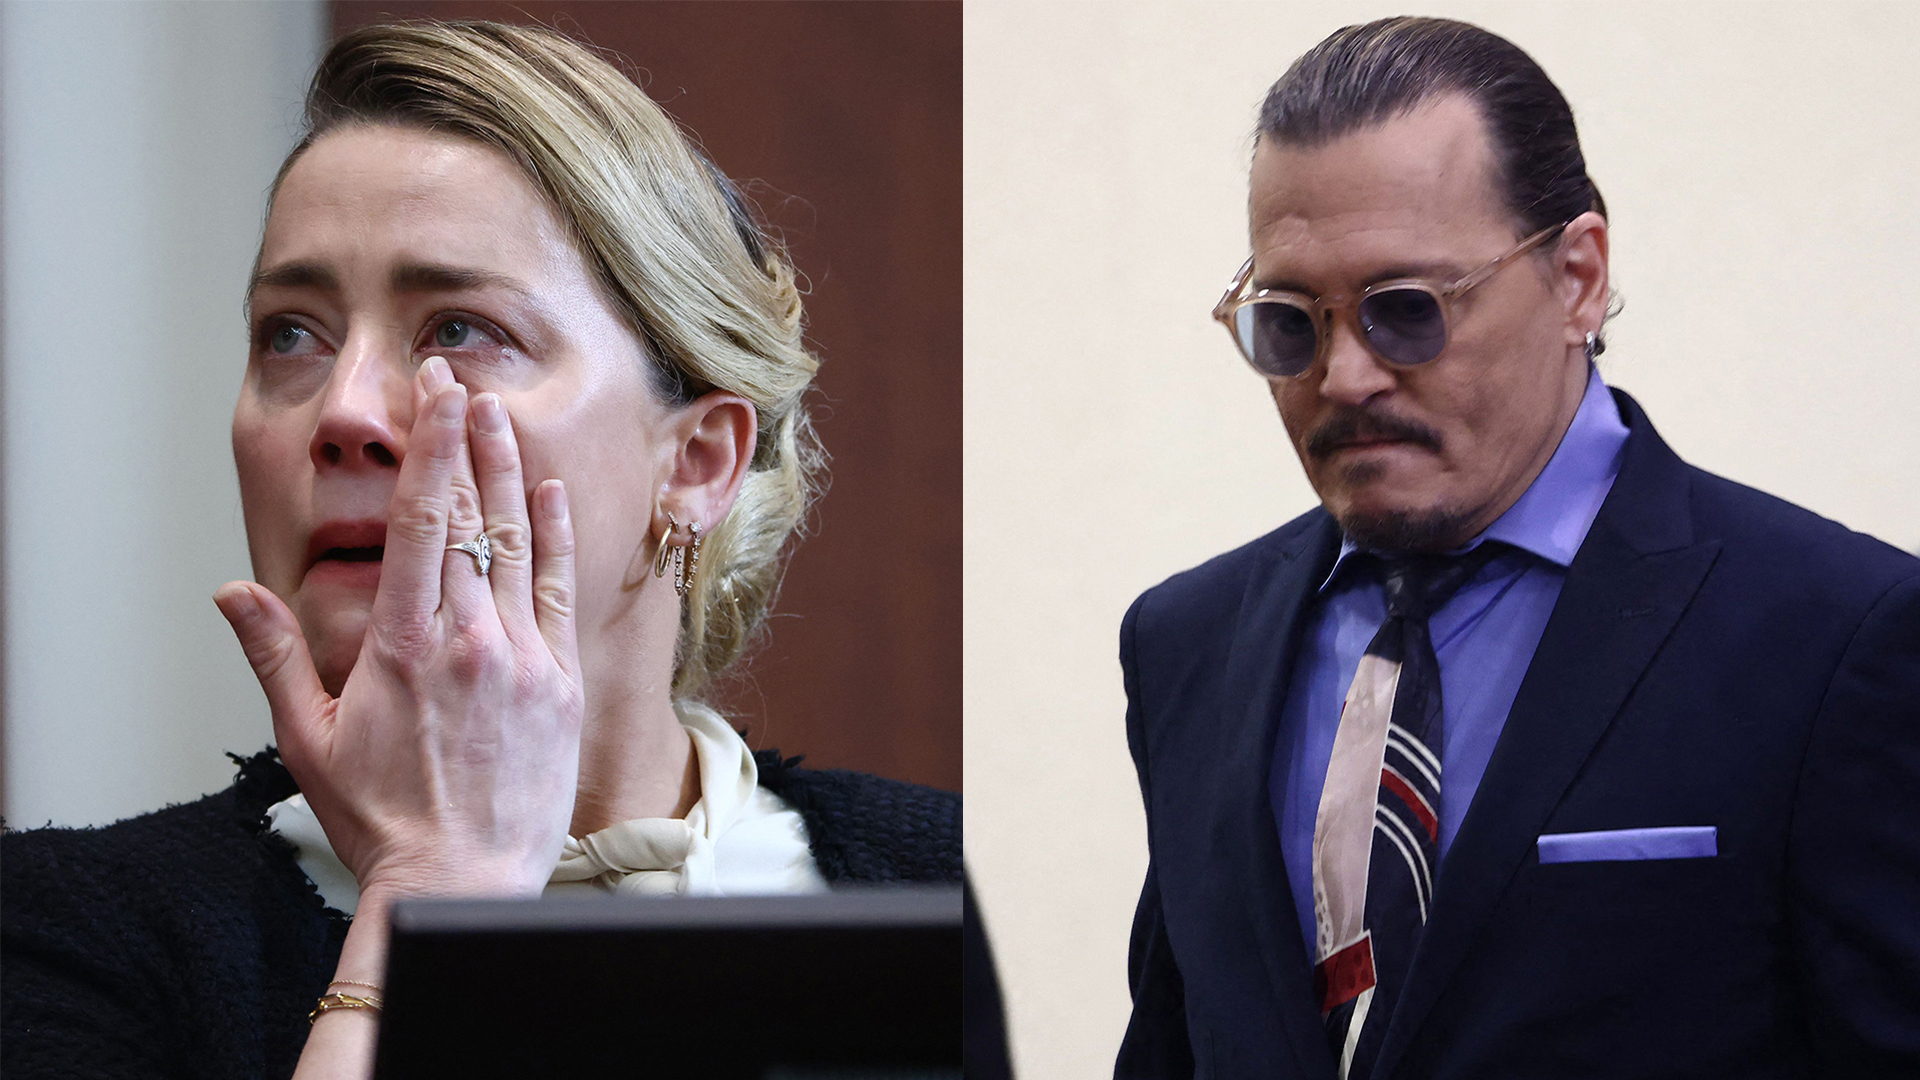 Amber Heard Testifies That Johnny Depp Kicked Her On 2014 Flight From Boston To Los Angeles